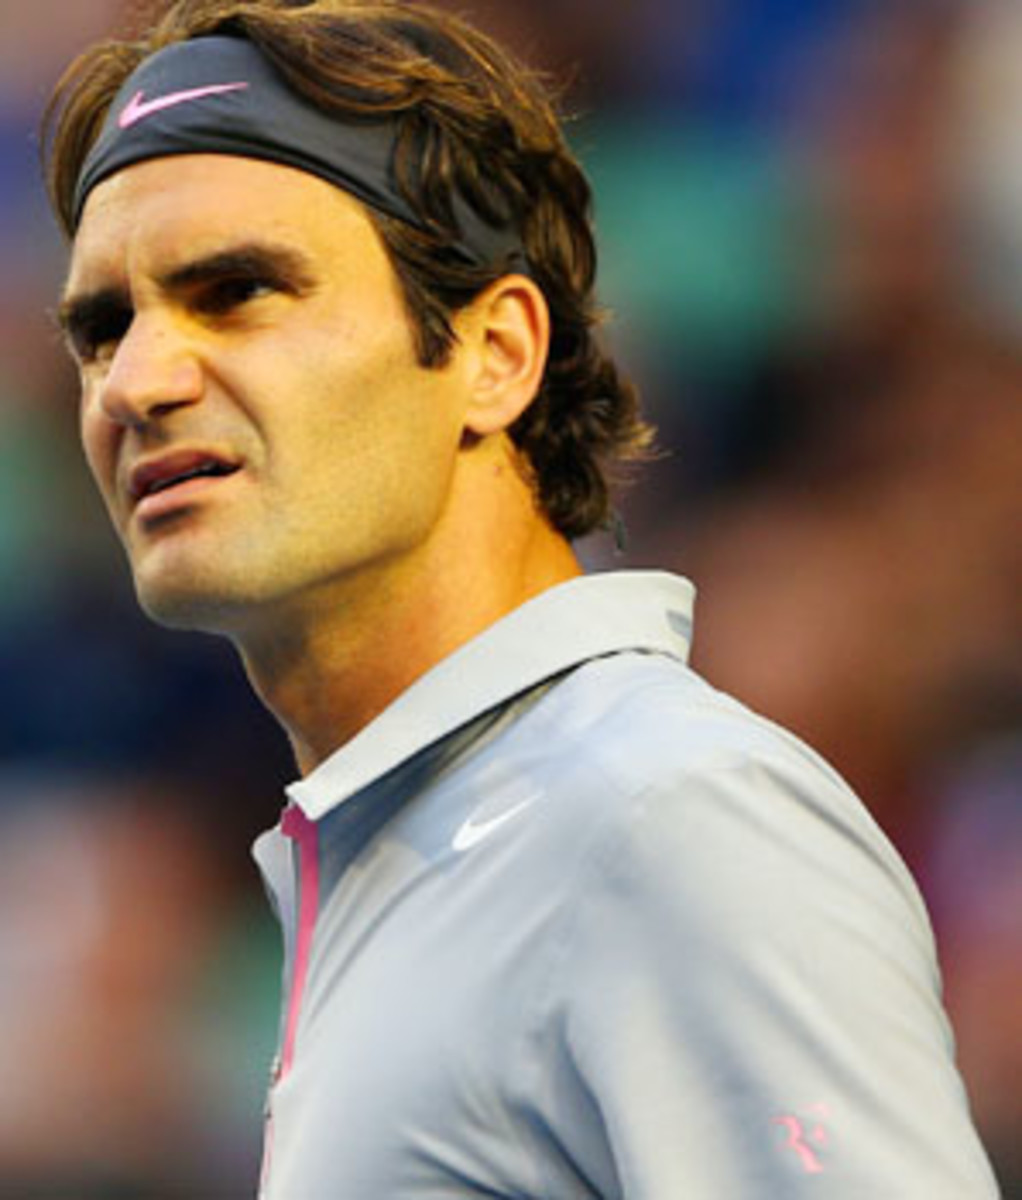 Roger Federer plays Andy Murray at Australian Open